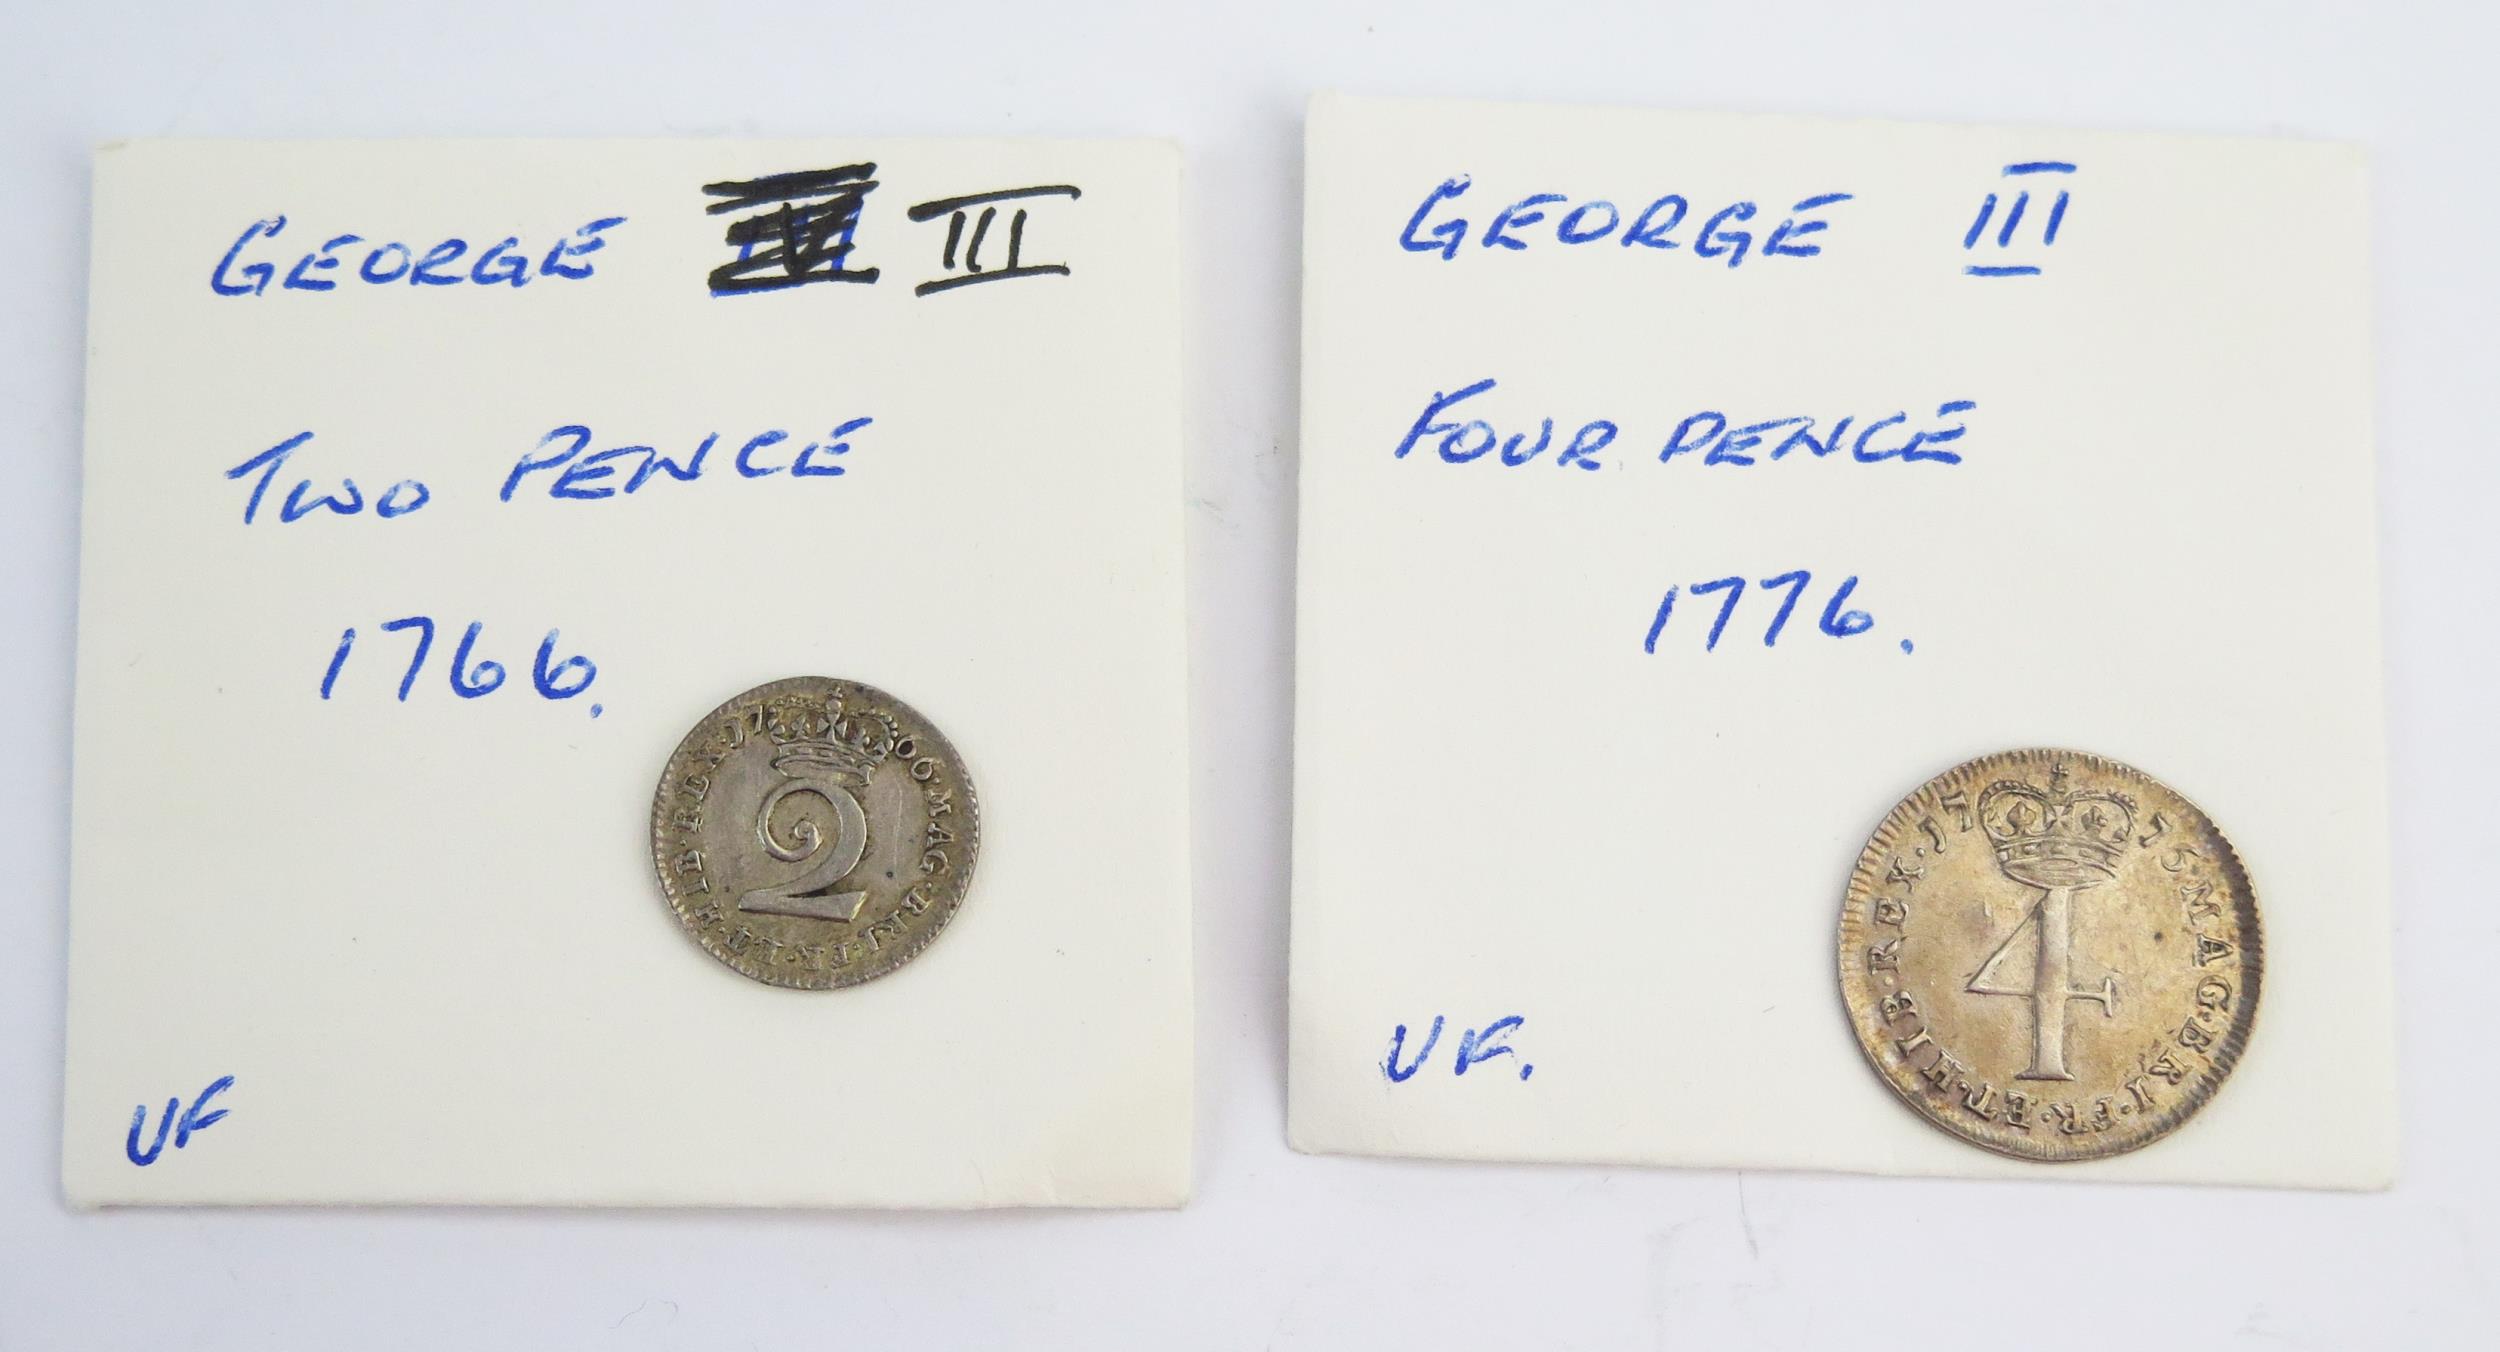 George III 1766 twopence and 1776 fourpence.